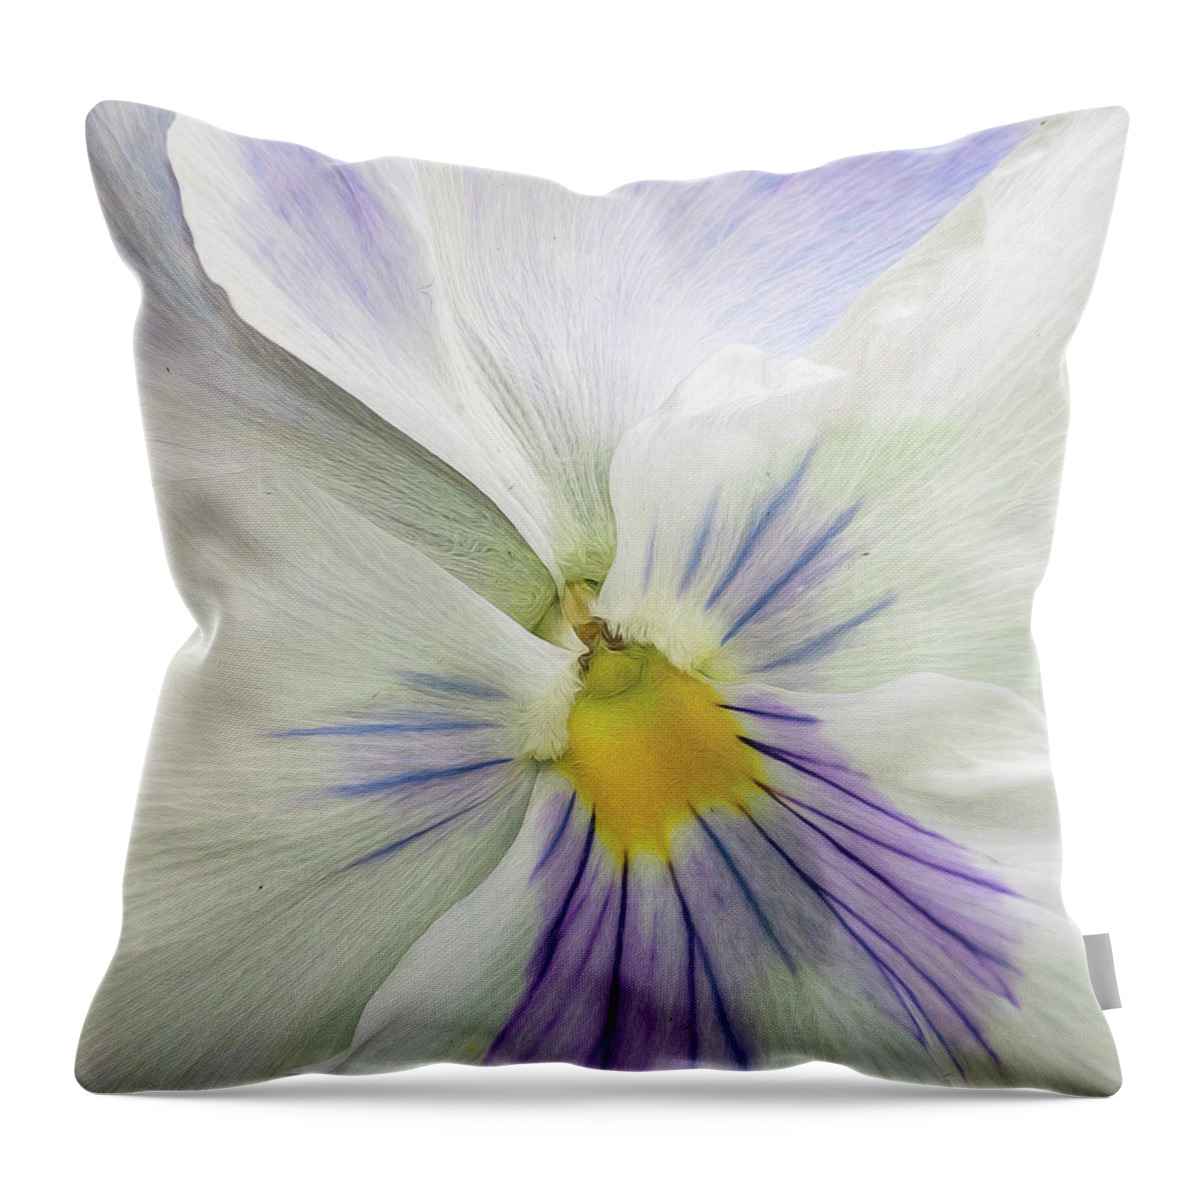 Flower Throw Pillow featuring the photograph Pansy Macro by Cathy Kovarik